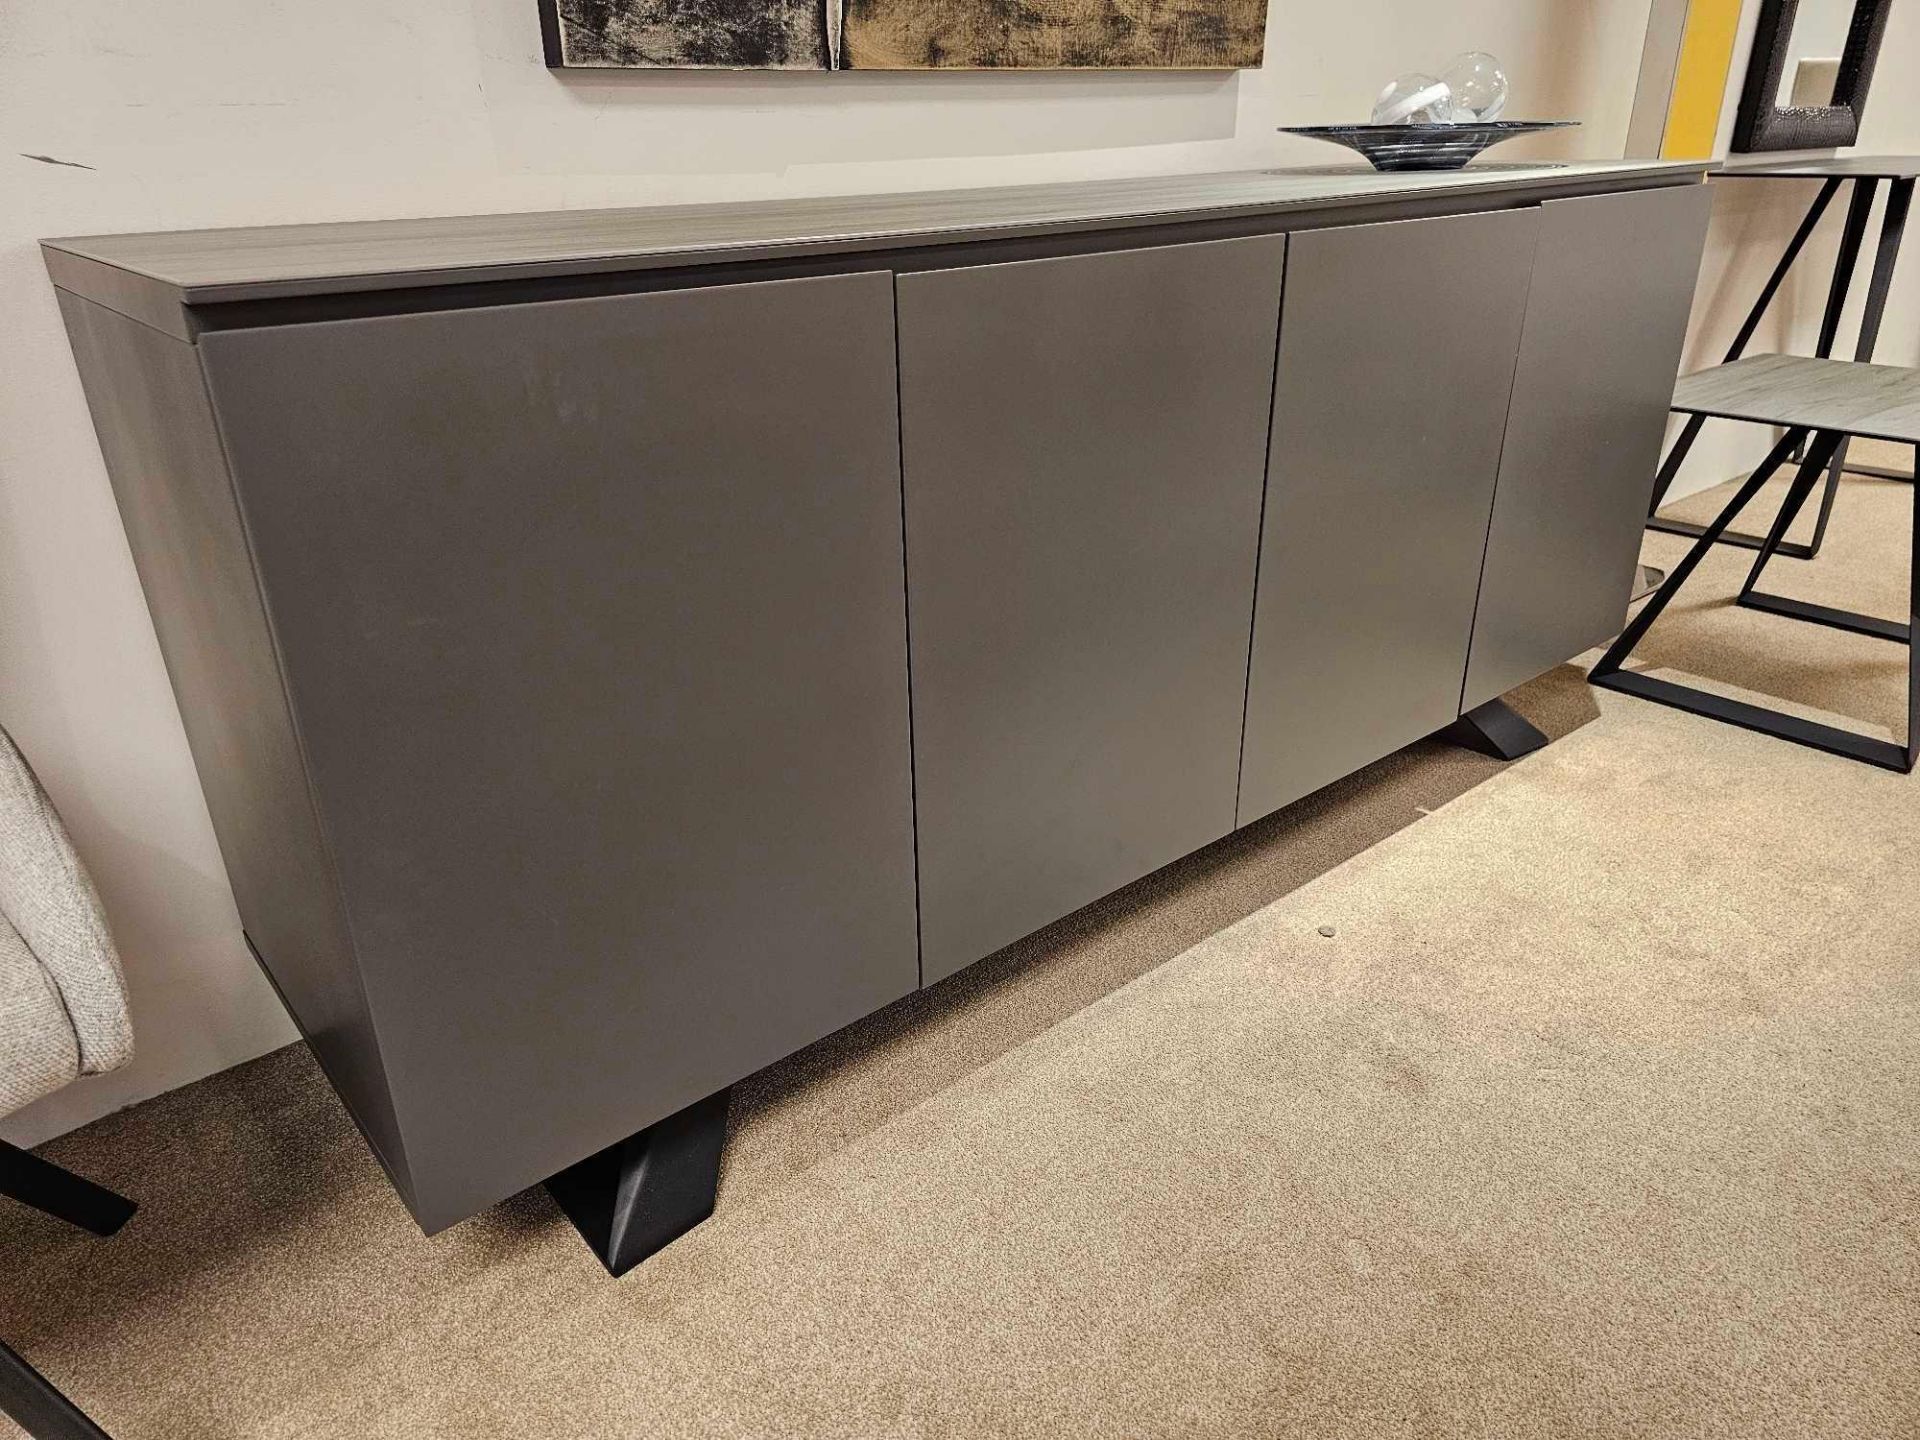 Spartan Sideboard by Kesterport The Spartan Four Door Sideboard provides is striking as a stand - Bild 2 aus 12